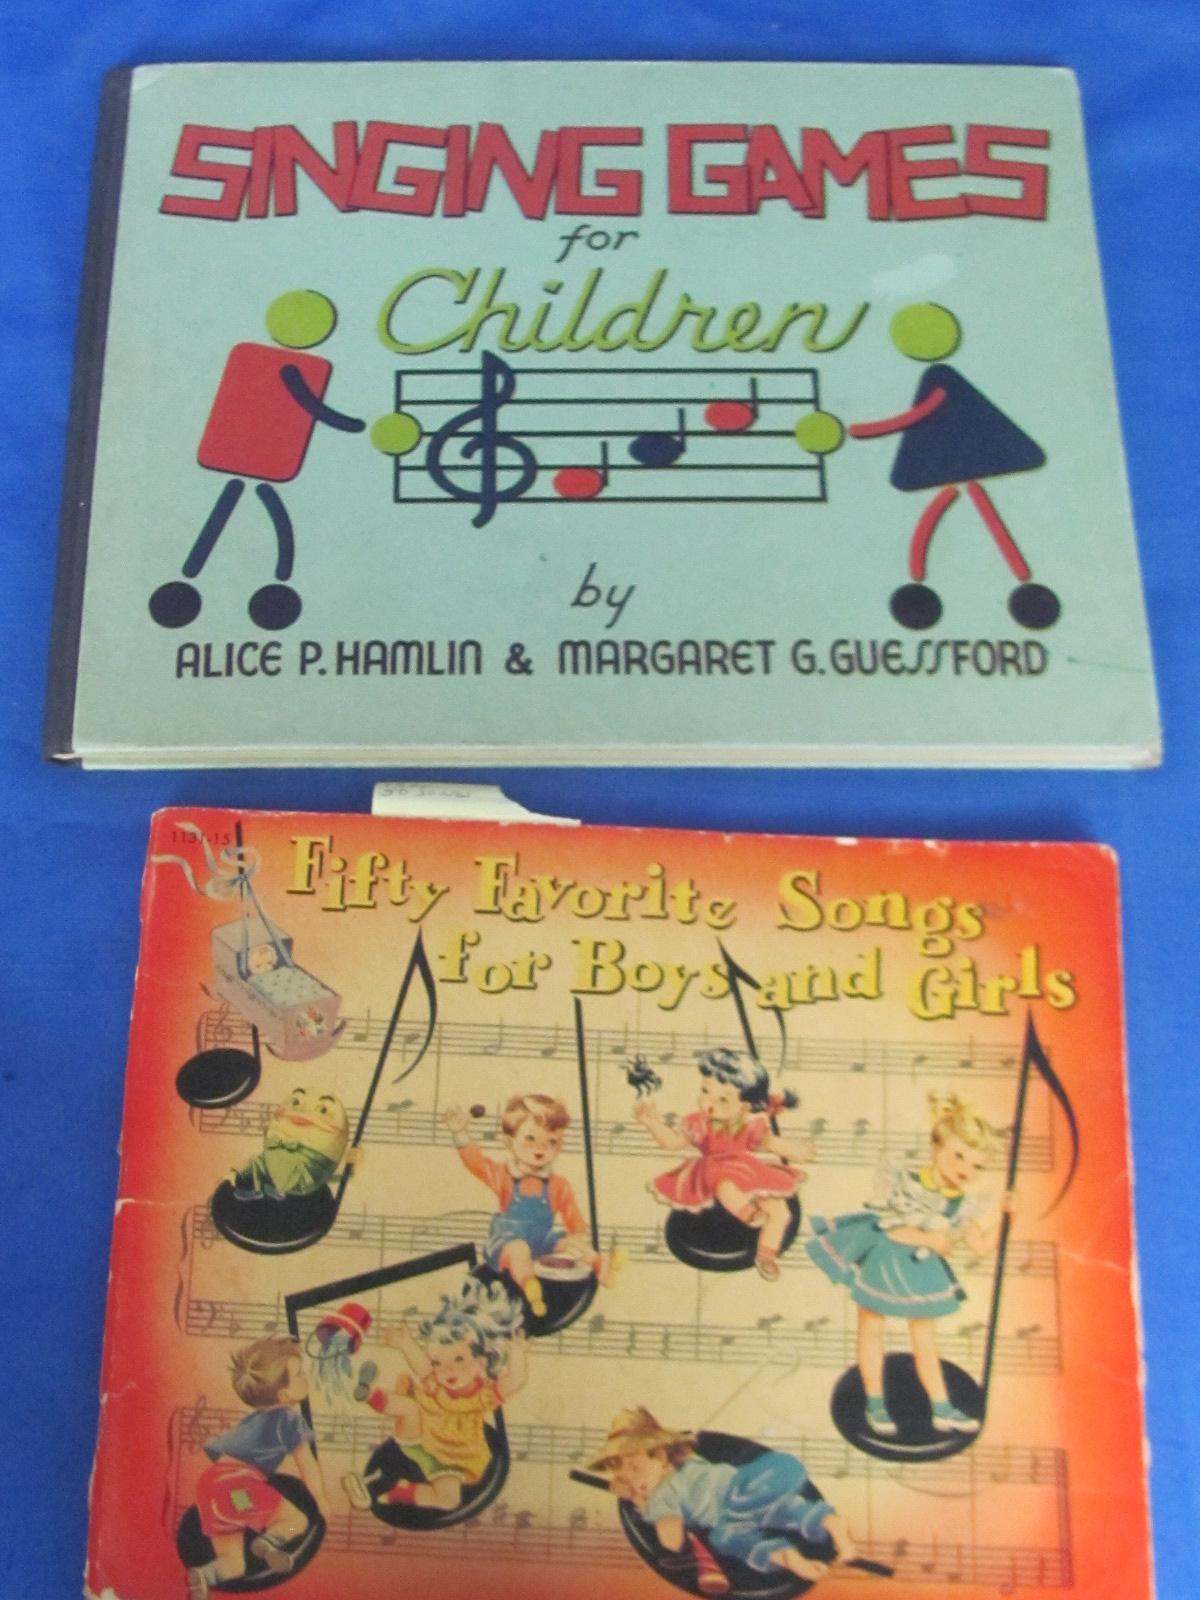 Mix of Young Children's Books (School items)